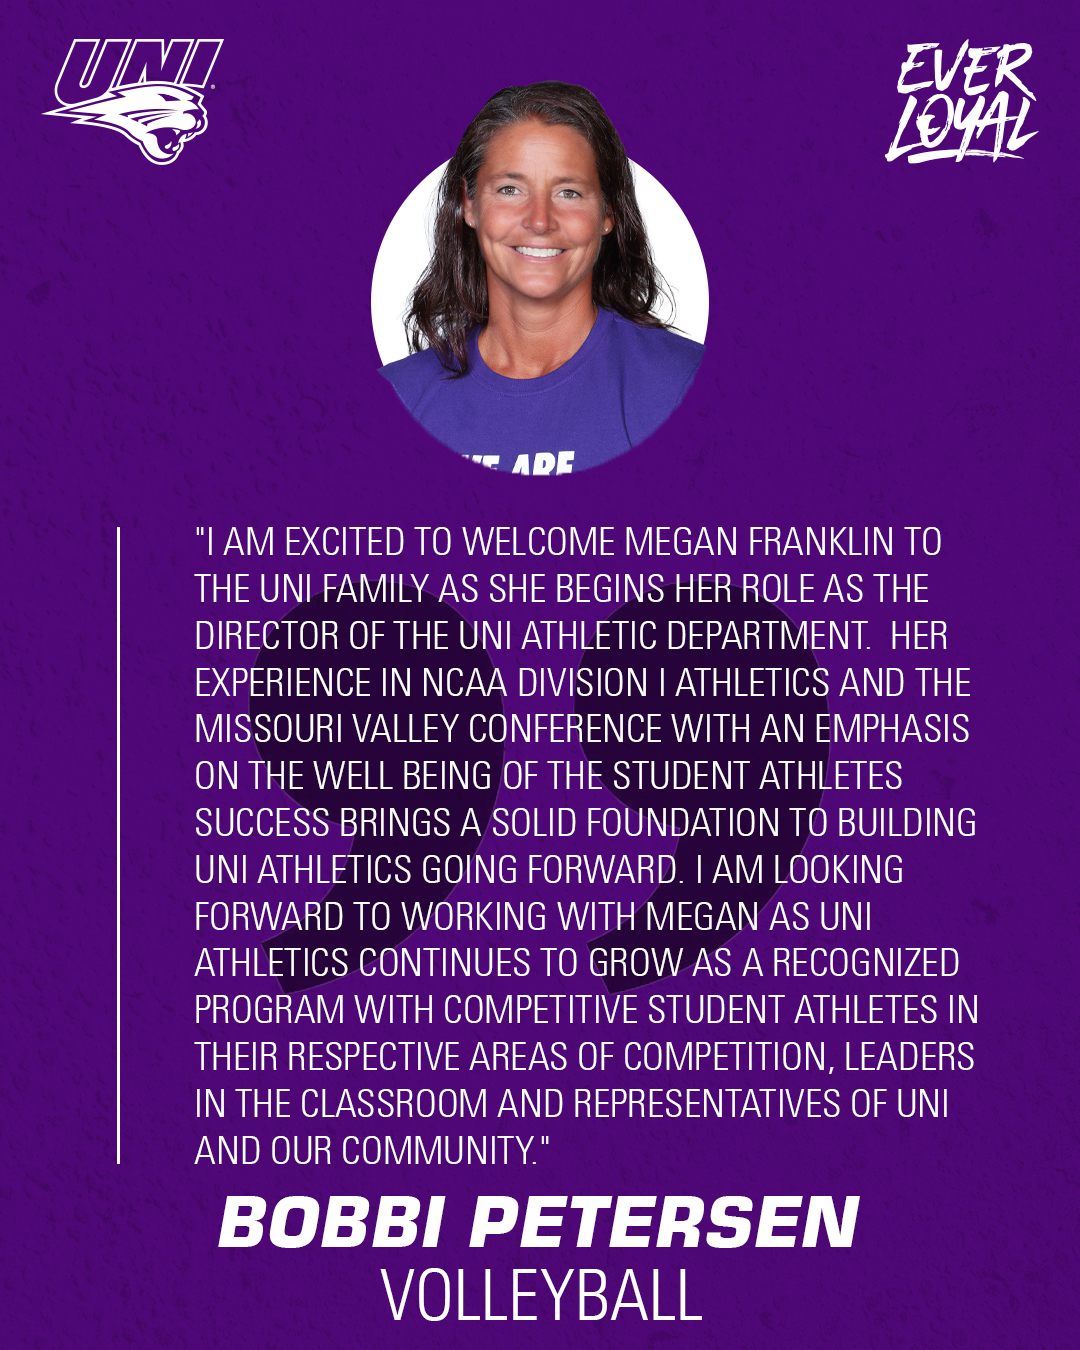 Bobbi Petersen: "I am excited to welcome Megan Franklin to the UNI family as she begins her role as the Director of the UNI Athletic Department.  Her experience in NCAA Division I Athletics and the Missouri Valley Conference with an emphasis on the well being of the student athletes success brings a solid foundation to building UNI Athletics going forward. I am looking forward to working with Megan as UNI Athletics continues to grow as a recognized program with competitive student athletes in their respective areas of competition, leaders in the classroom and representatives of UNI and our community."